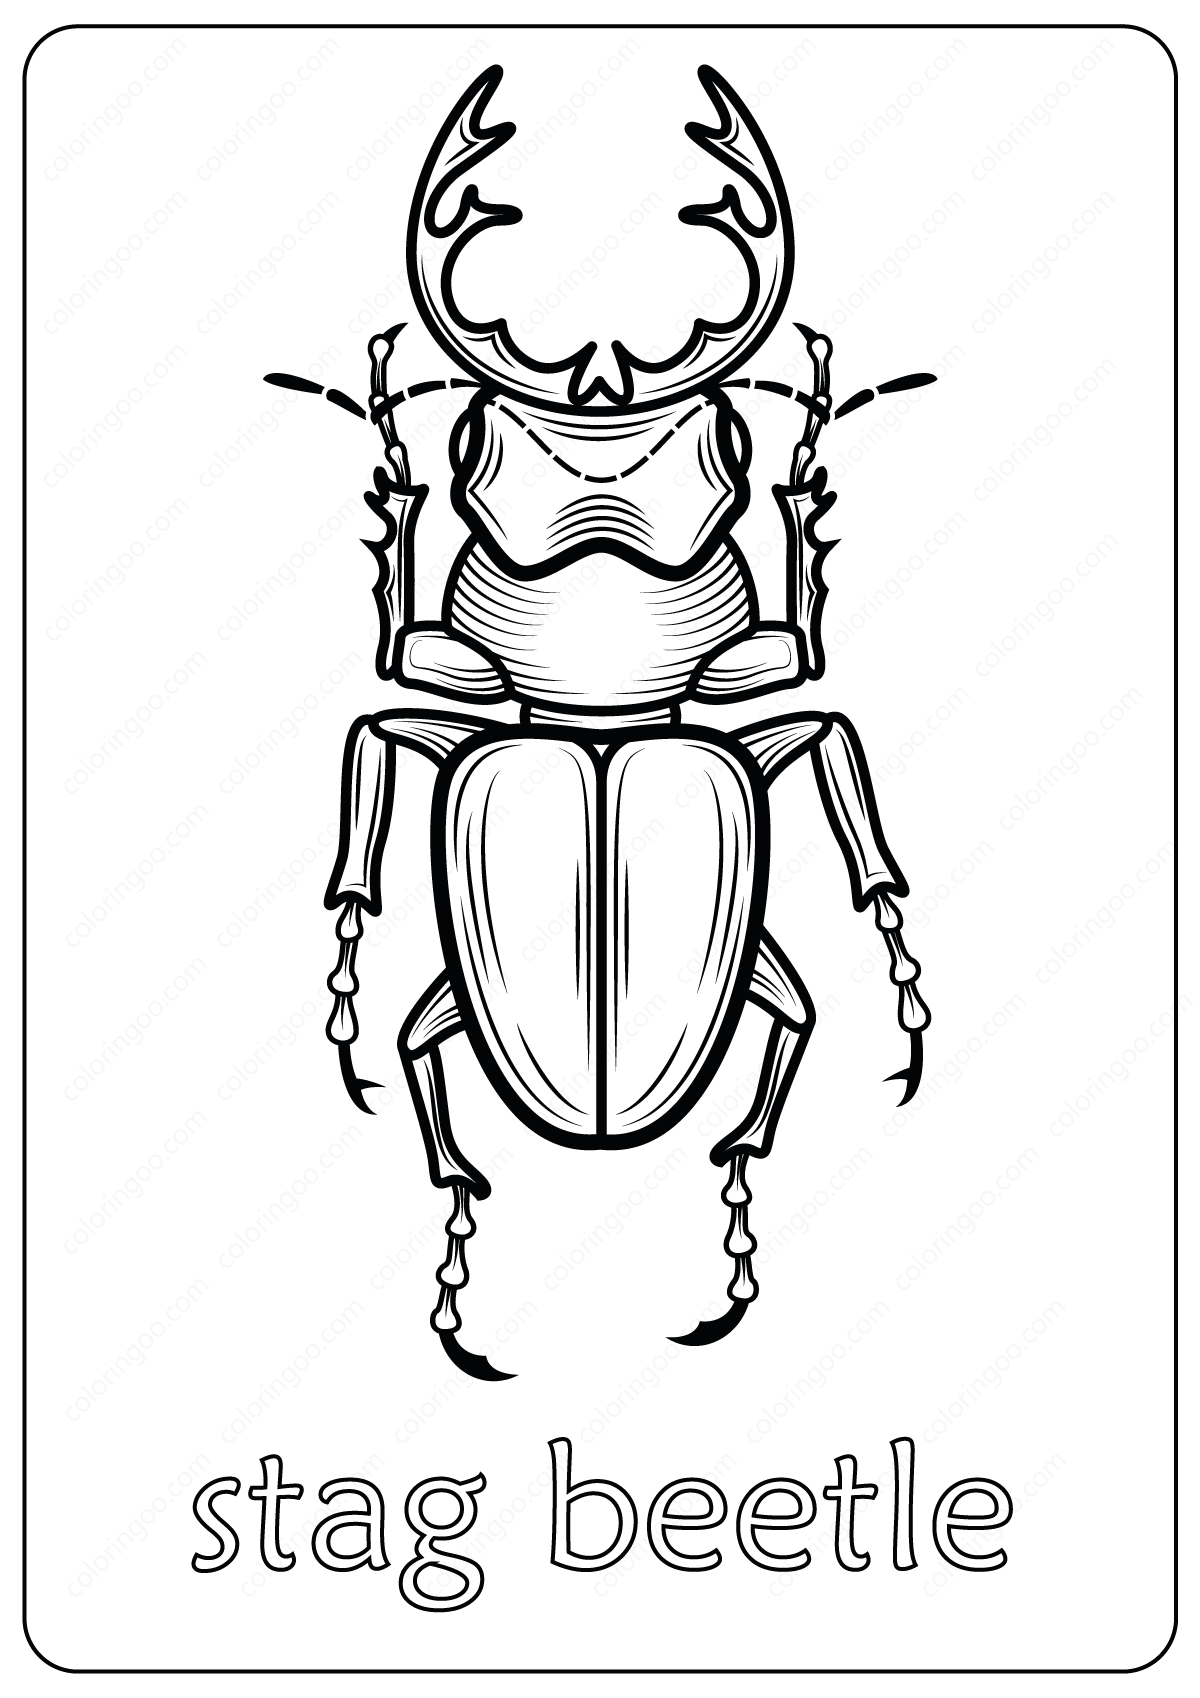 stag beetle coloring pages